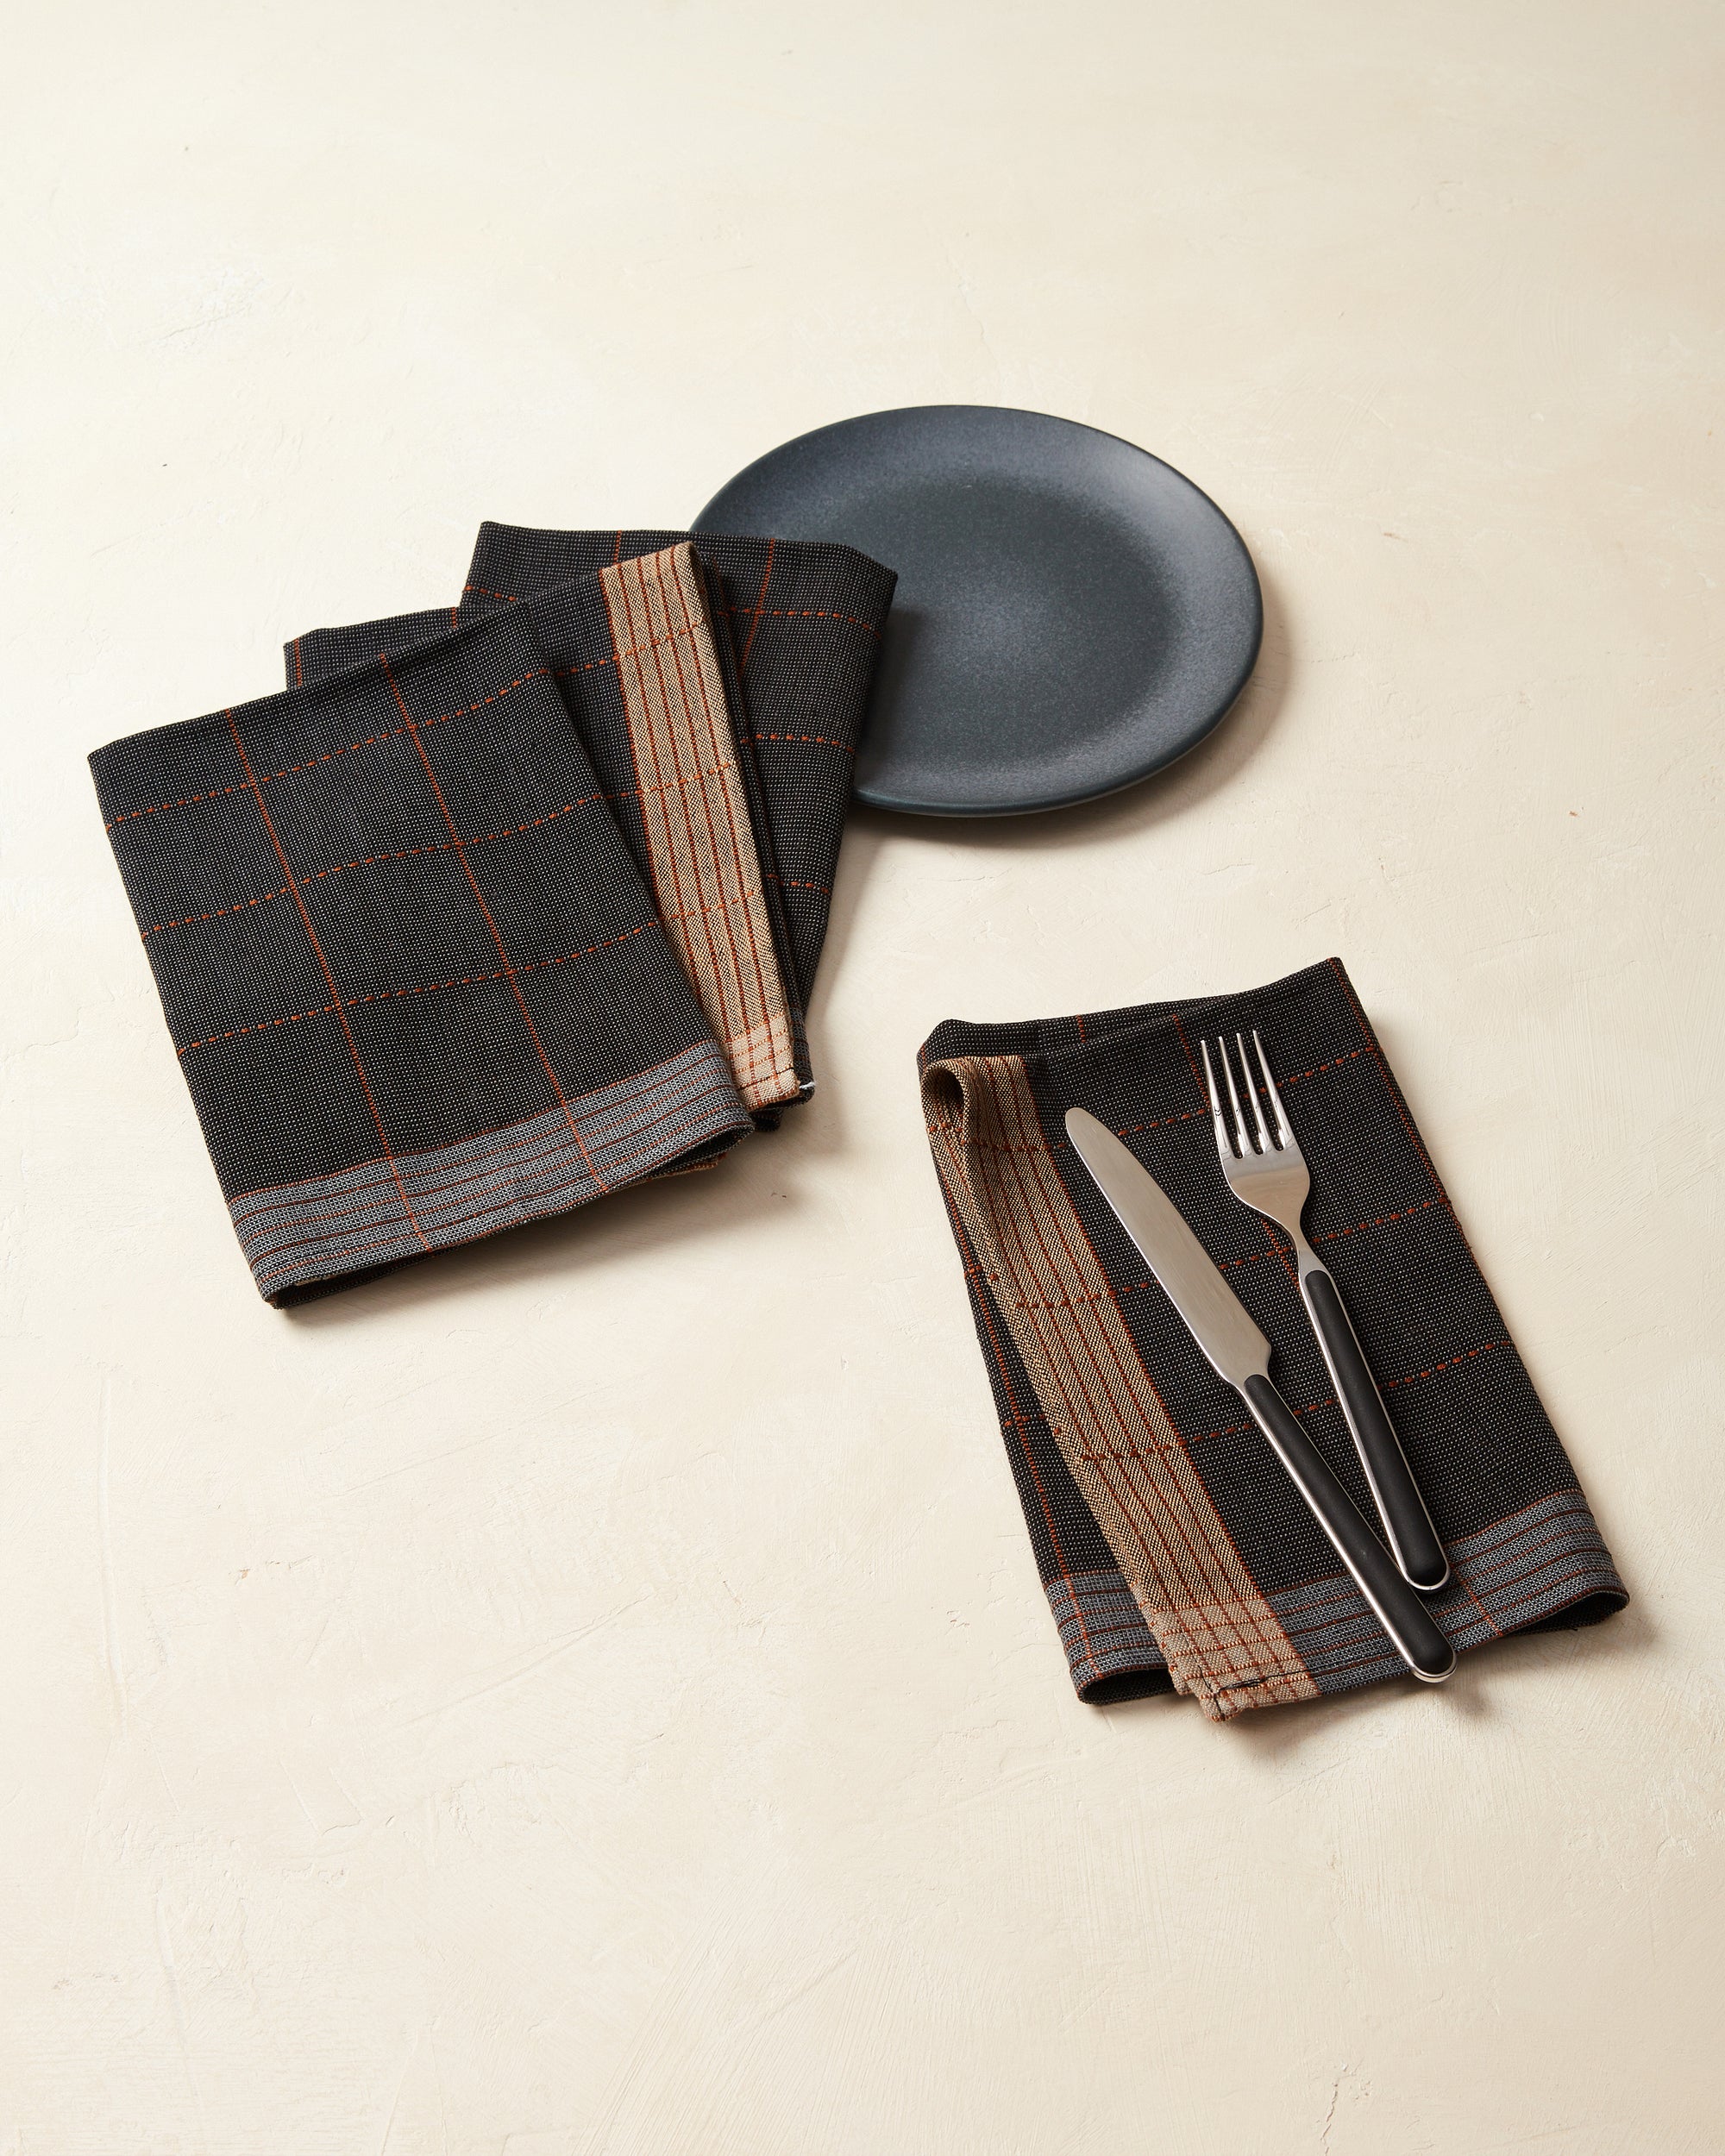 MINNA ethically handwoven cotton napkins in a grid pattern in black, charcoal, and brown.